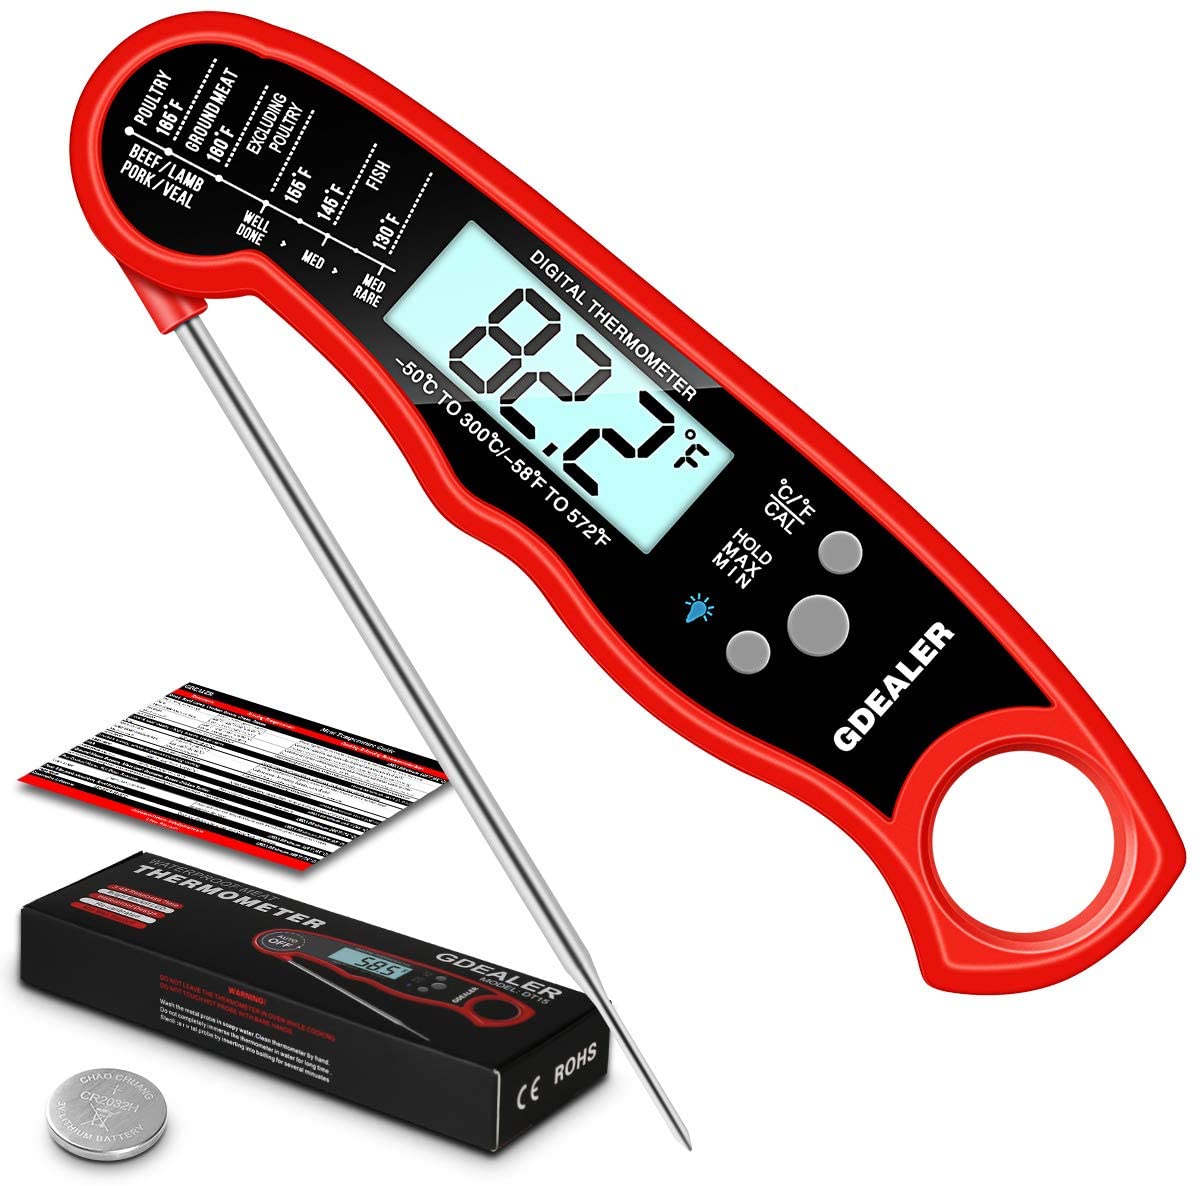 GDEALER DT15 Waterproof Digital Instant Read Meat Thermometer Ultra-Fast Cooking Food Thermometer with 4.6” Folding Probe Calibration Function for Kitchen Milk Candy, BBQ Grill, Smokers